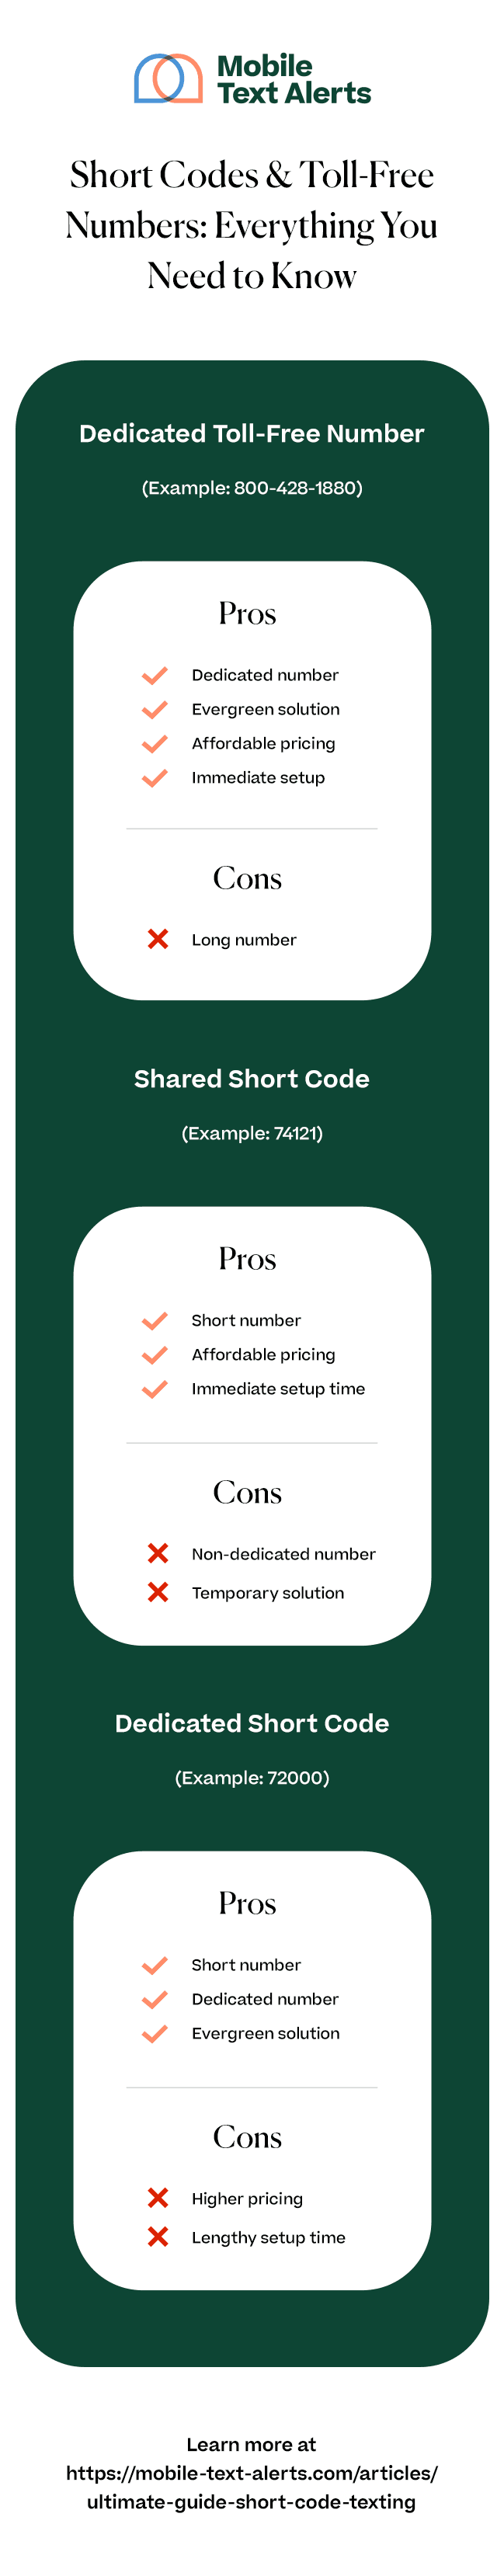 Short codes and Toll-free